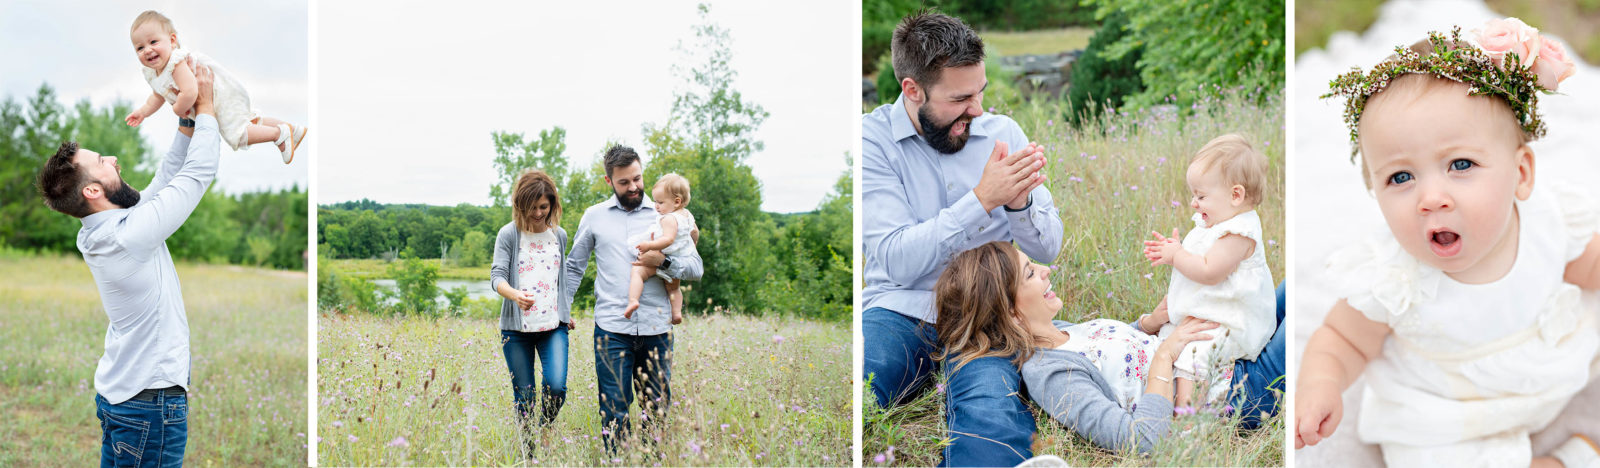 Young family lifestyle photography